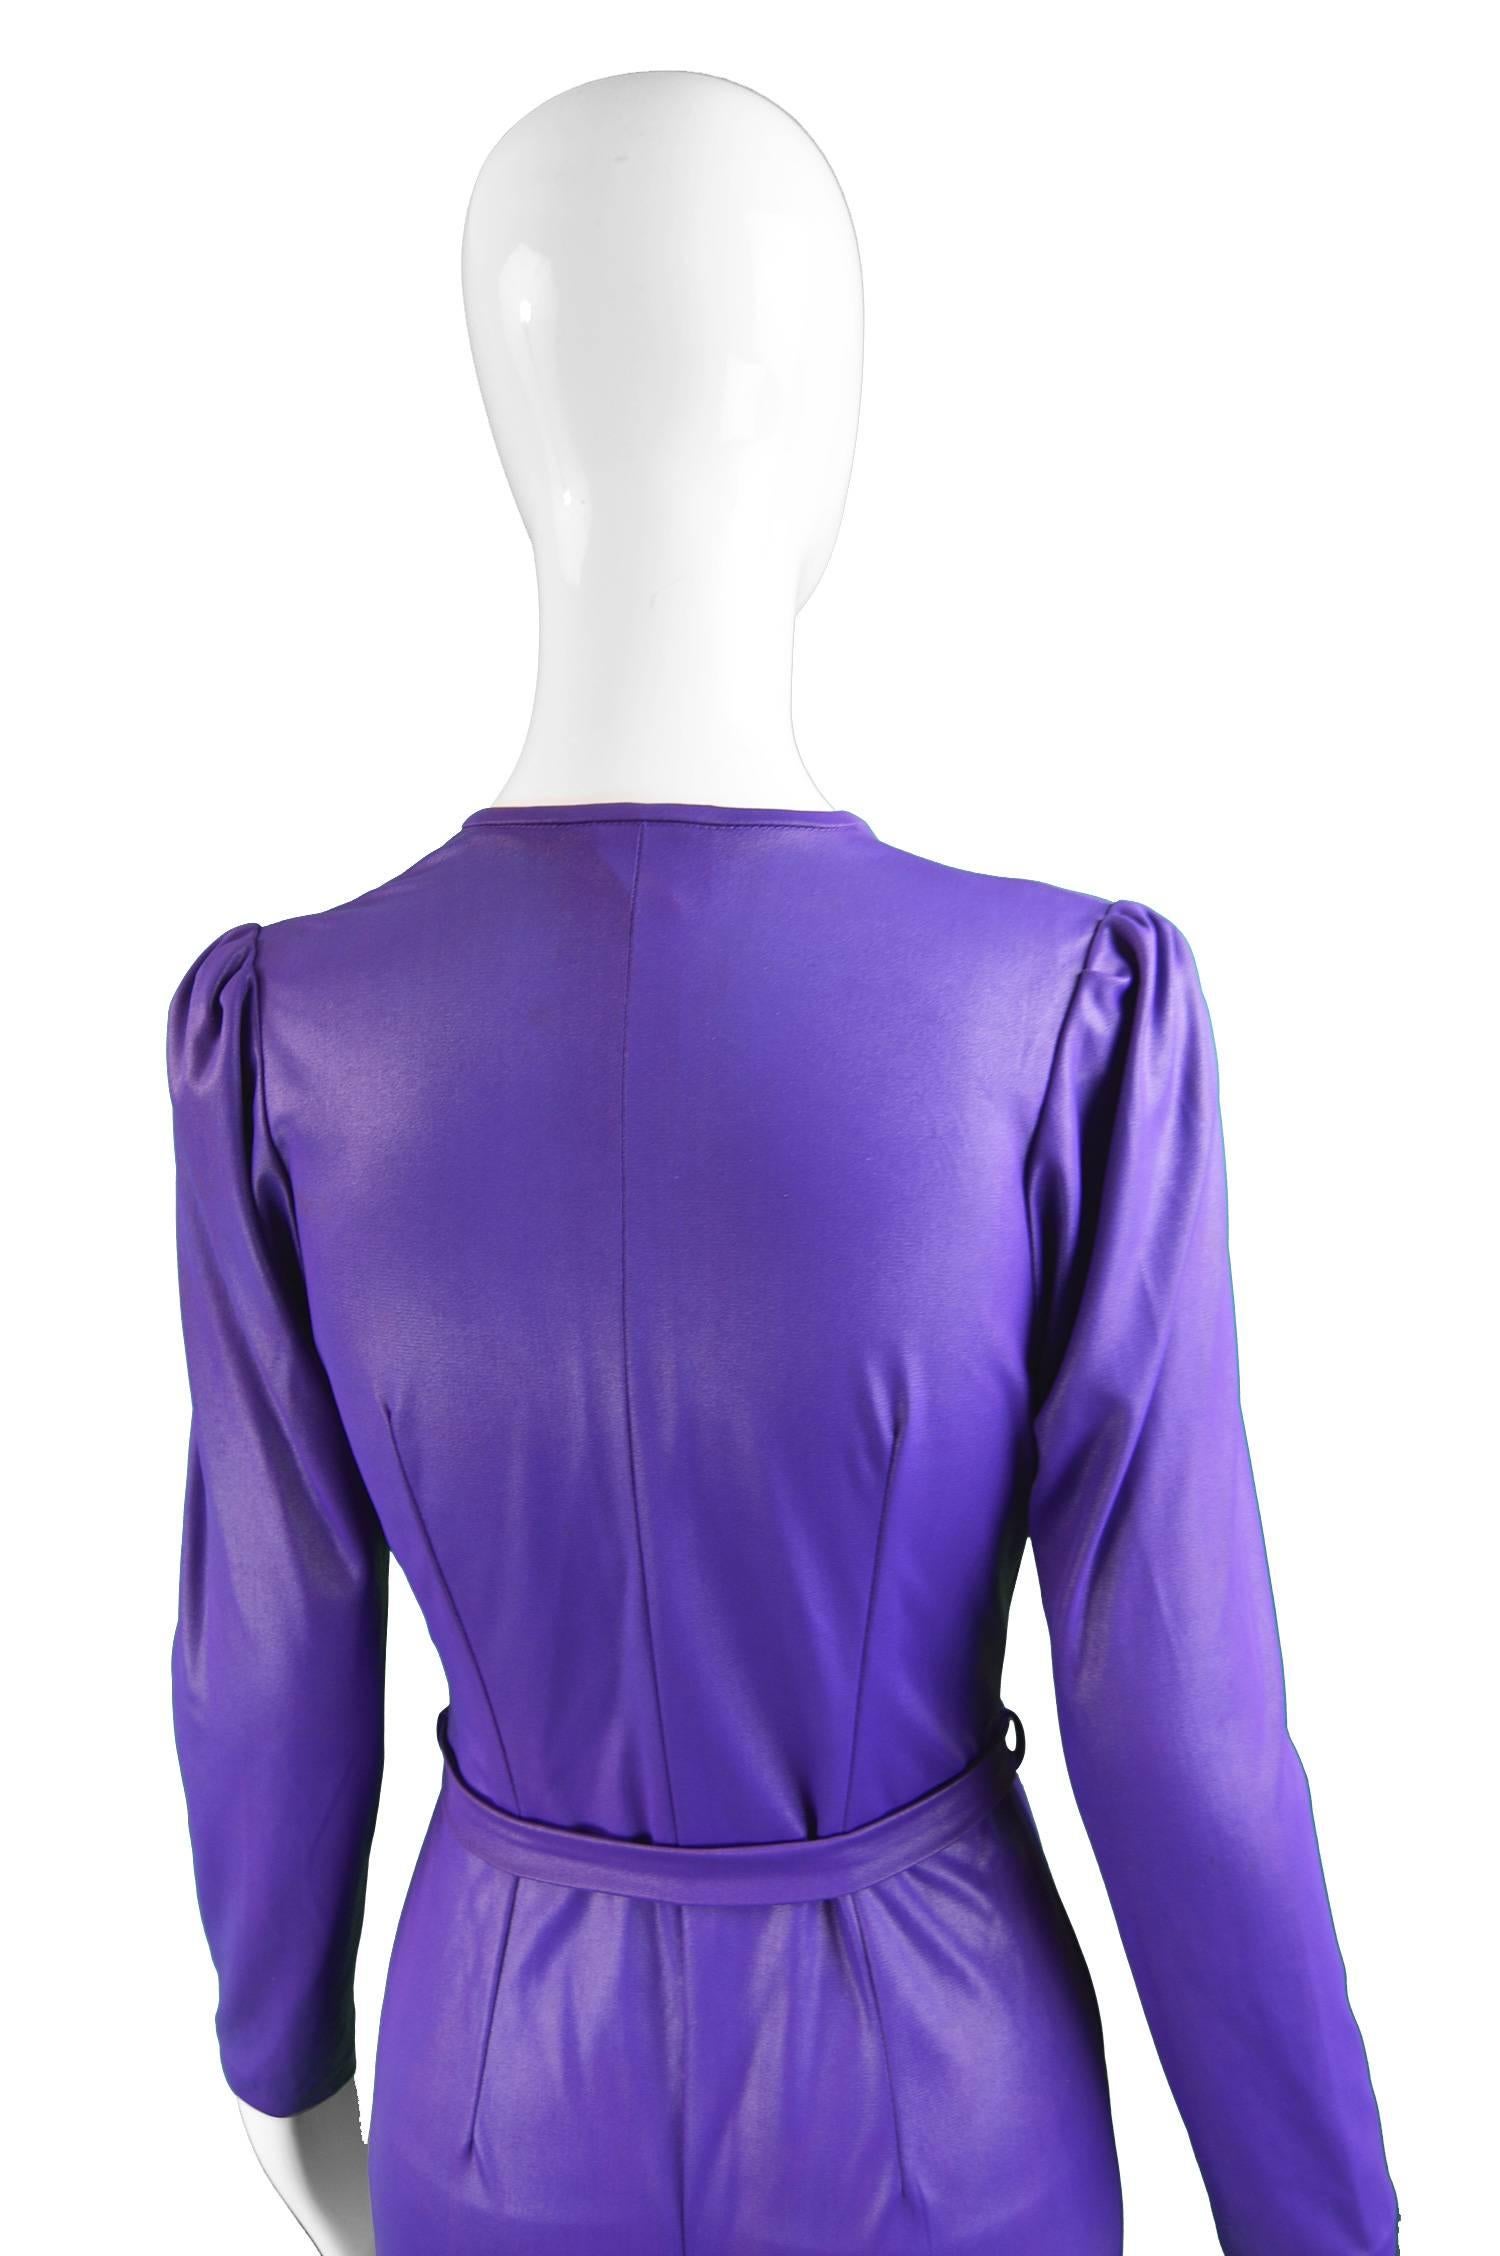 London Mob of Carnaby Street Purple Wet Look Playsuit, 1960s For Sale 2